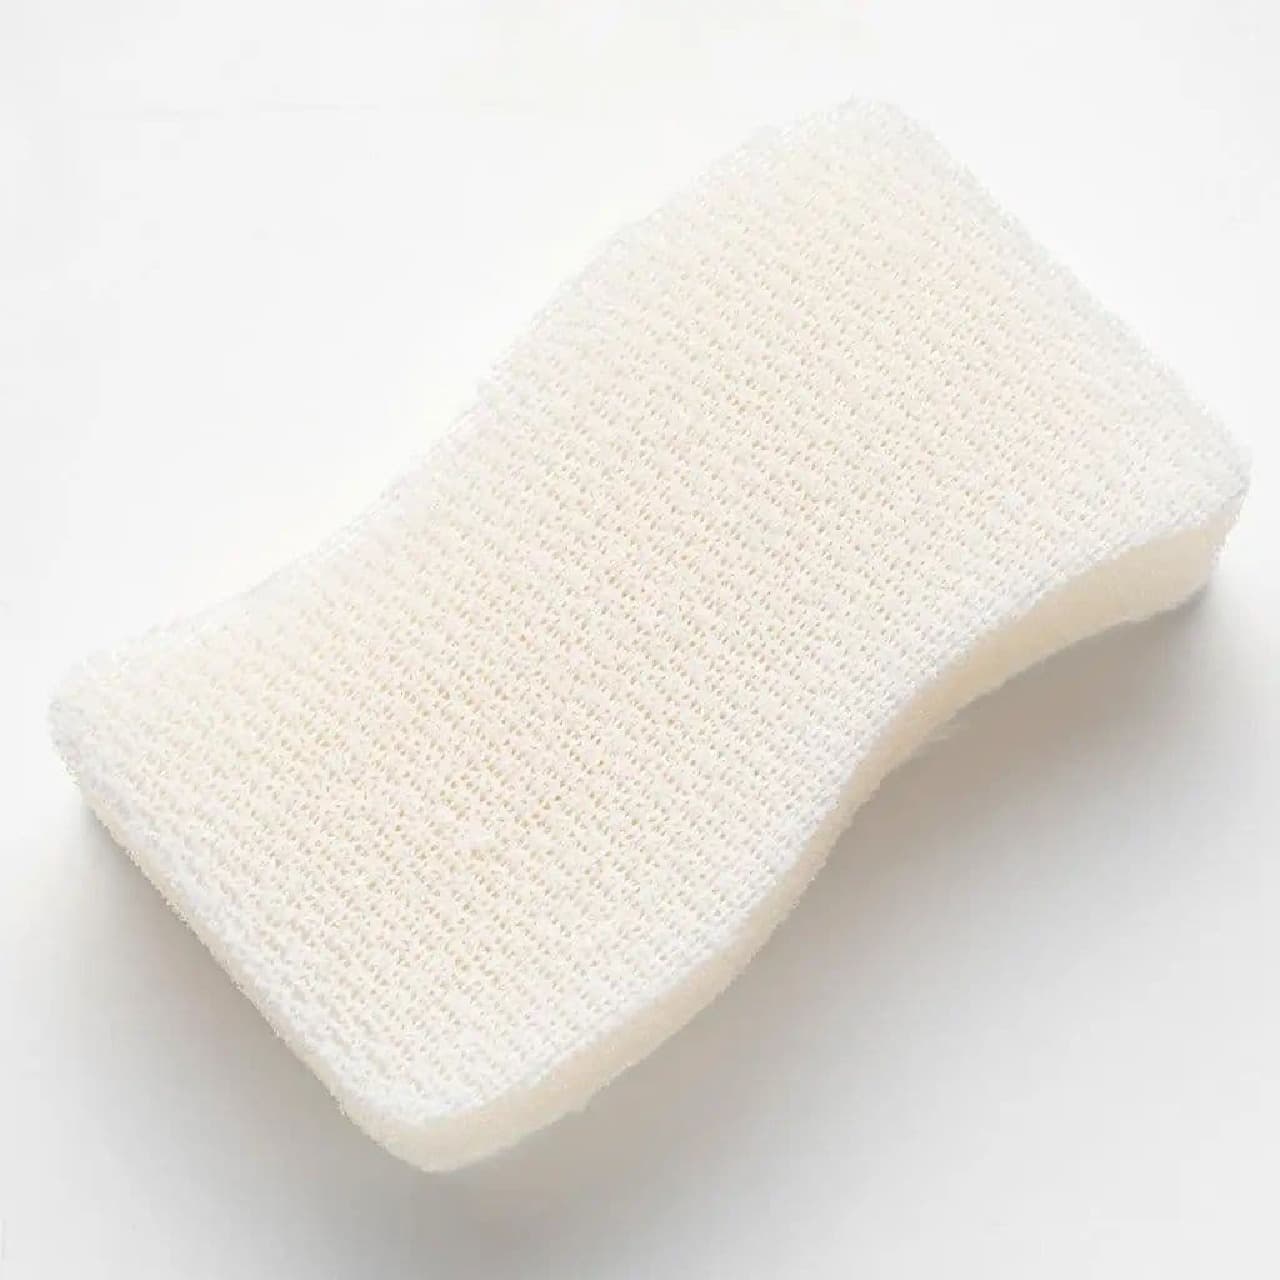 Nitori "Sponge for removing stains from wallpaper and sofas"